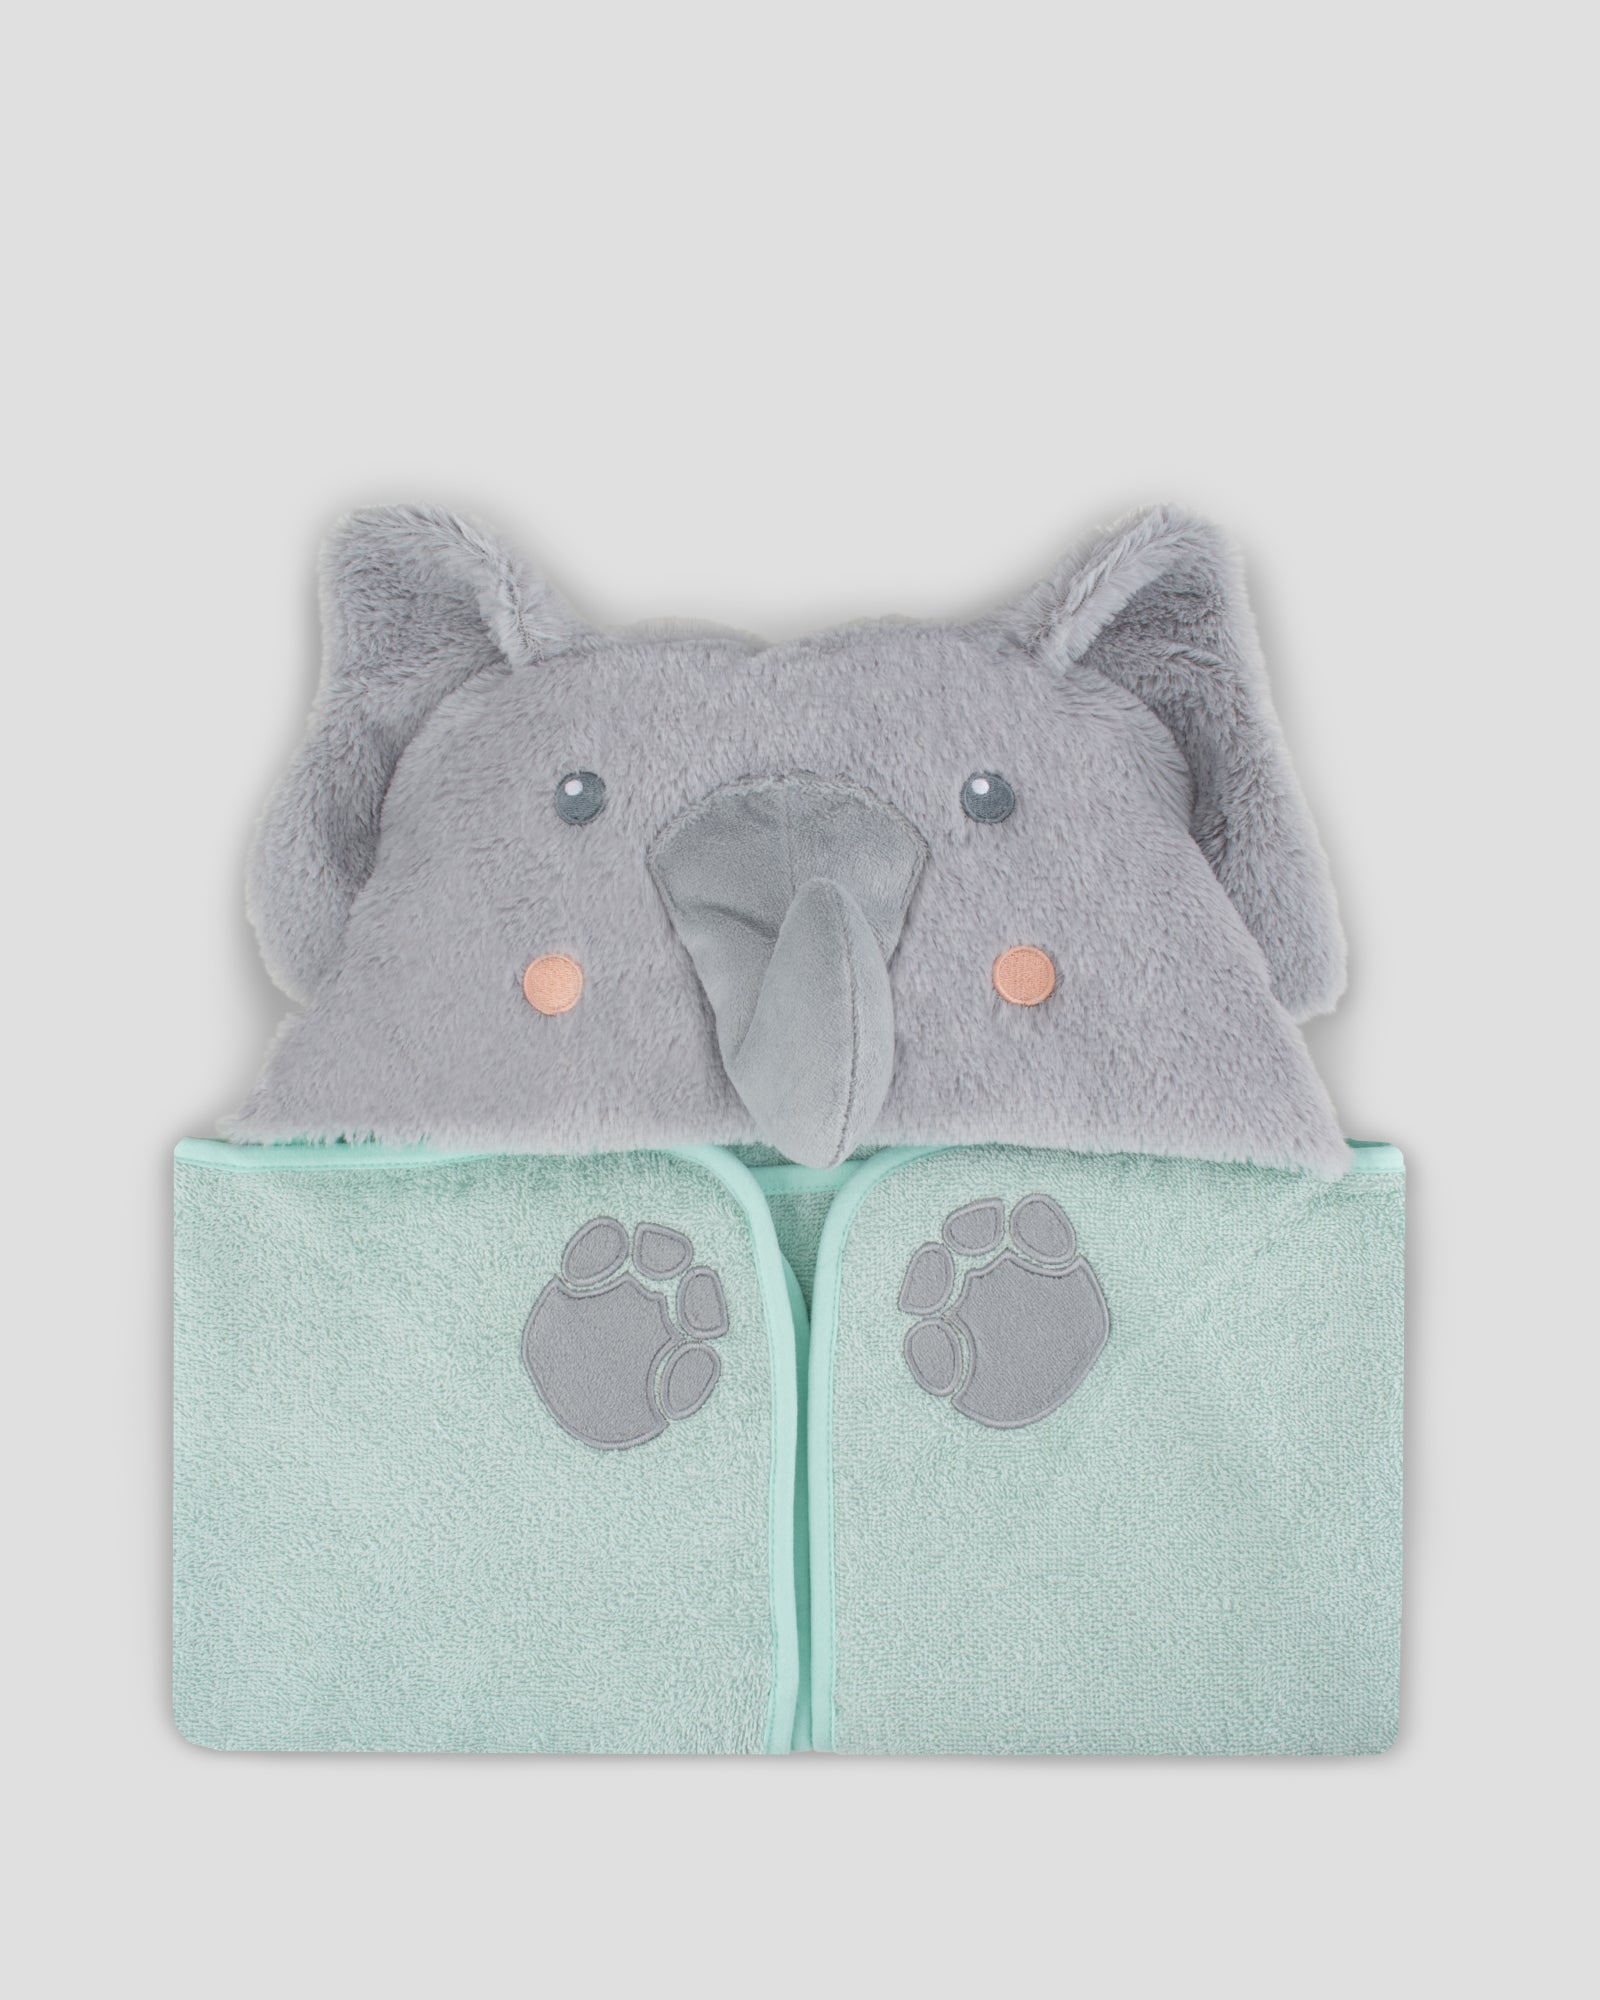 The Little Linen Company Parade Plush Baby Hooded Towel - Starburst Elephant